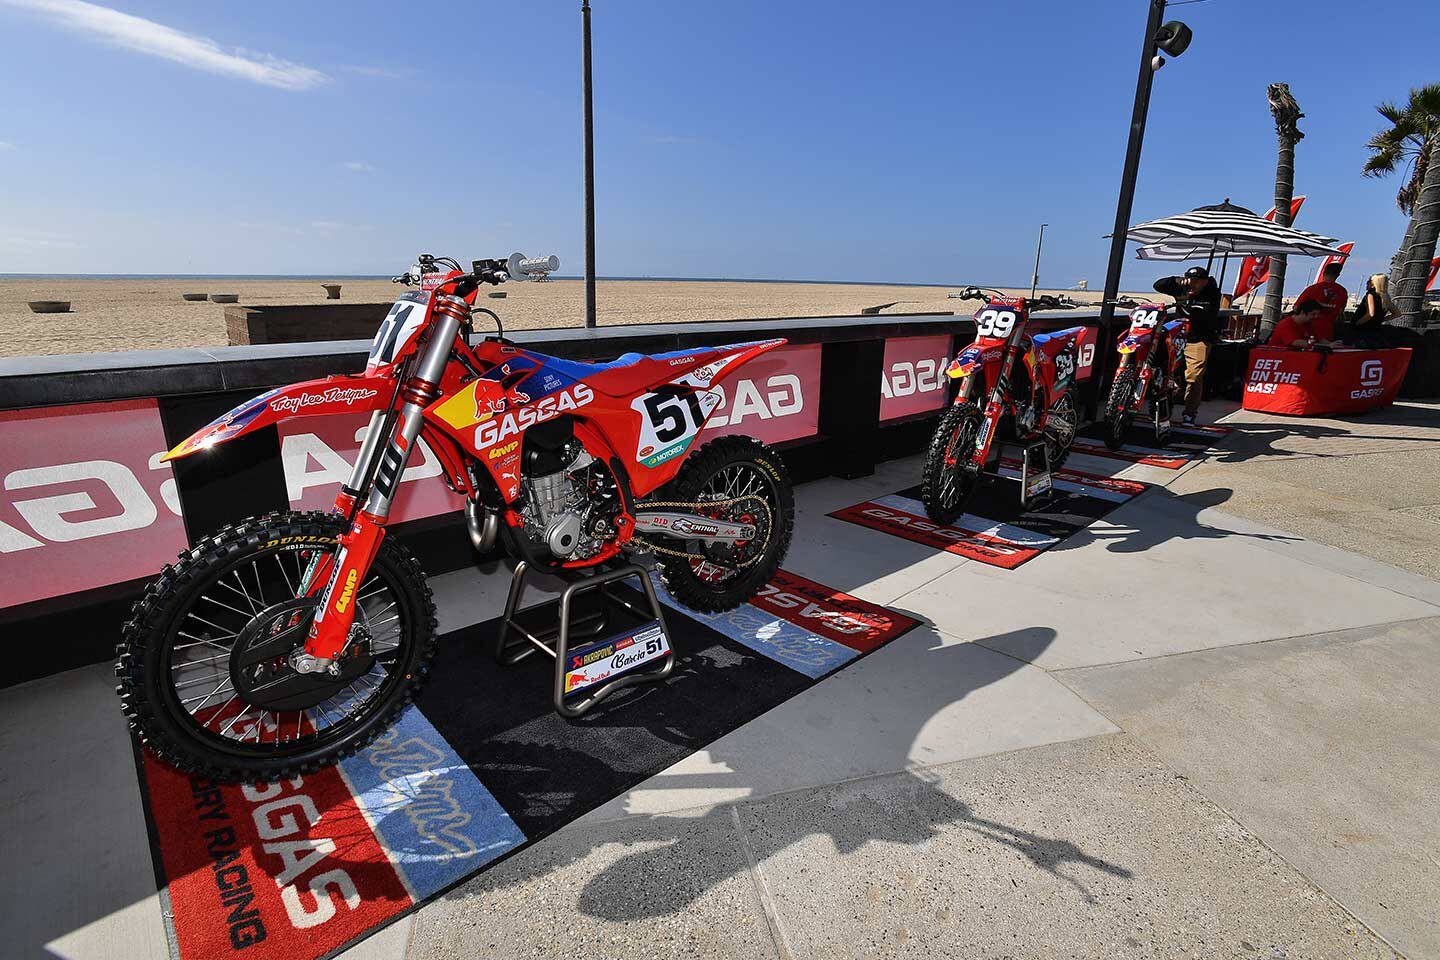 TROY LEE DESIGNS/RED BULL/GASGAS FACTORY RACING TAKE THE POSITIVES